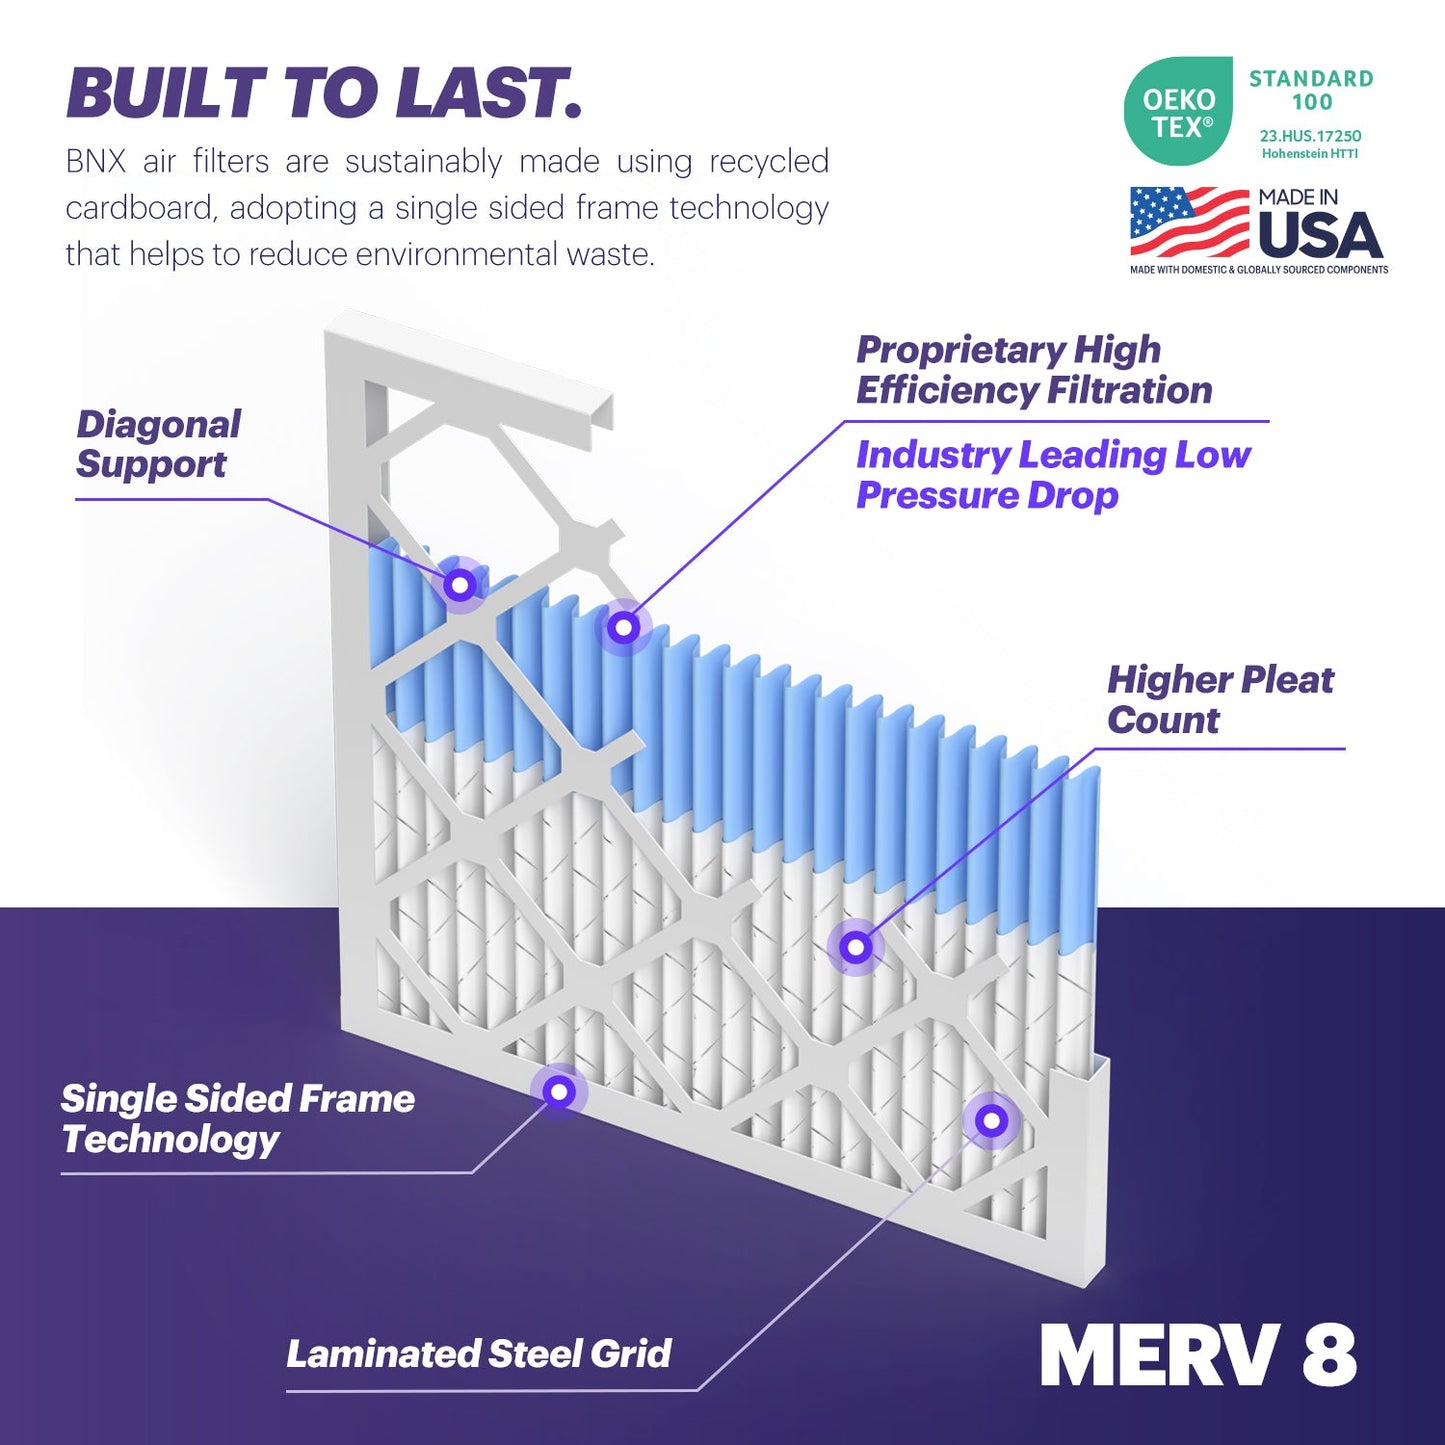 BNX TruFilter 20x24x1 MERV 8 Pleated Air Filter – Made in USA (6-Pack)